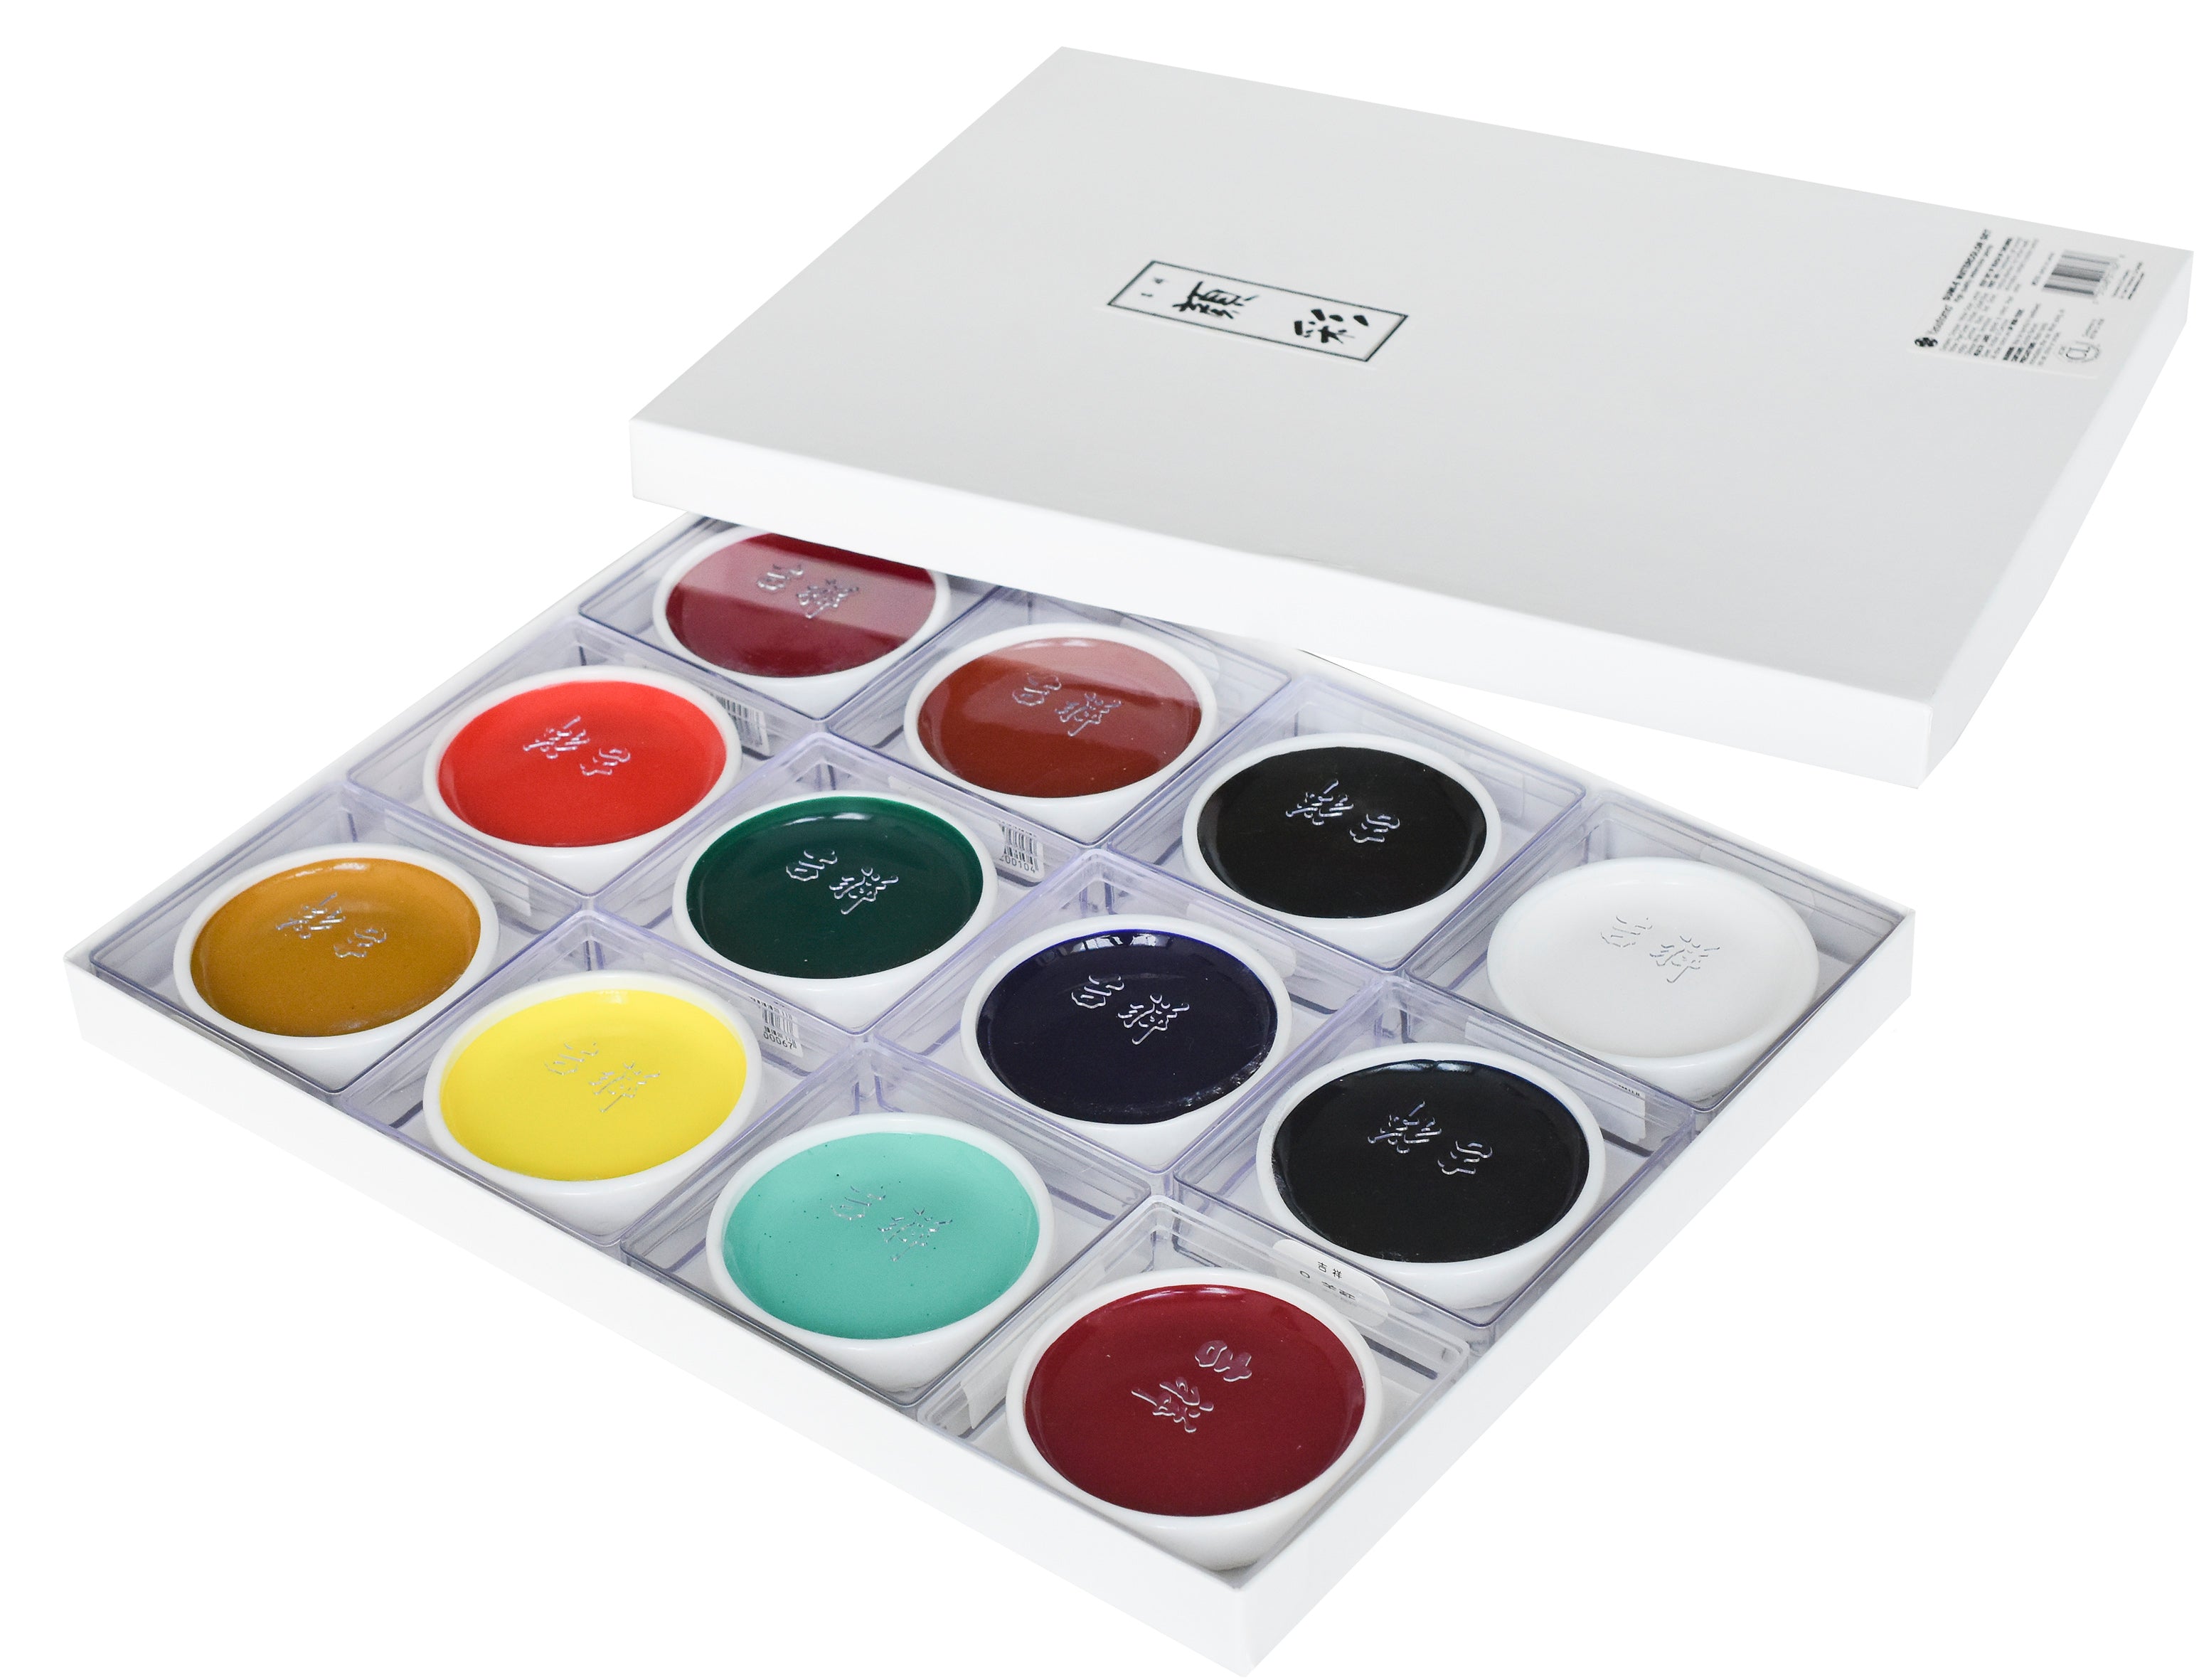 12 Color Traditional Japanese Watercolor Set in Porcelain Dishes, Larg –  Yasutomo